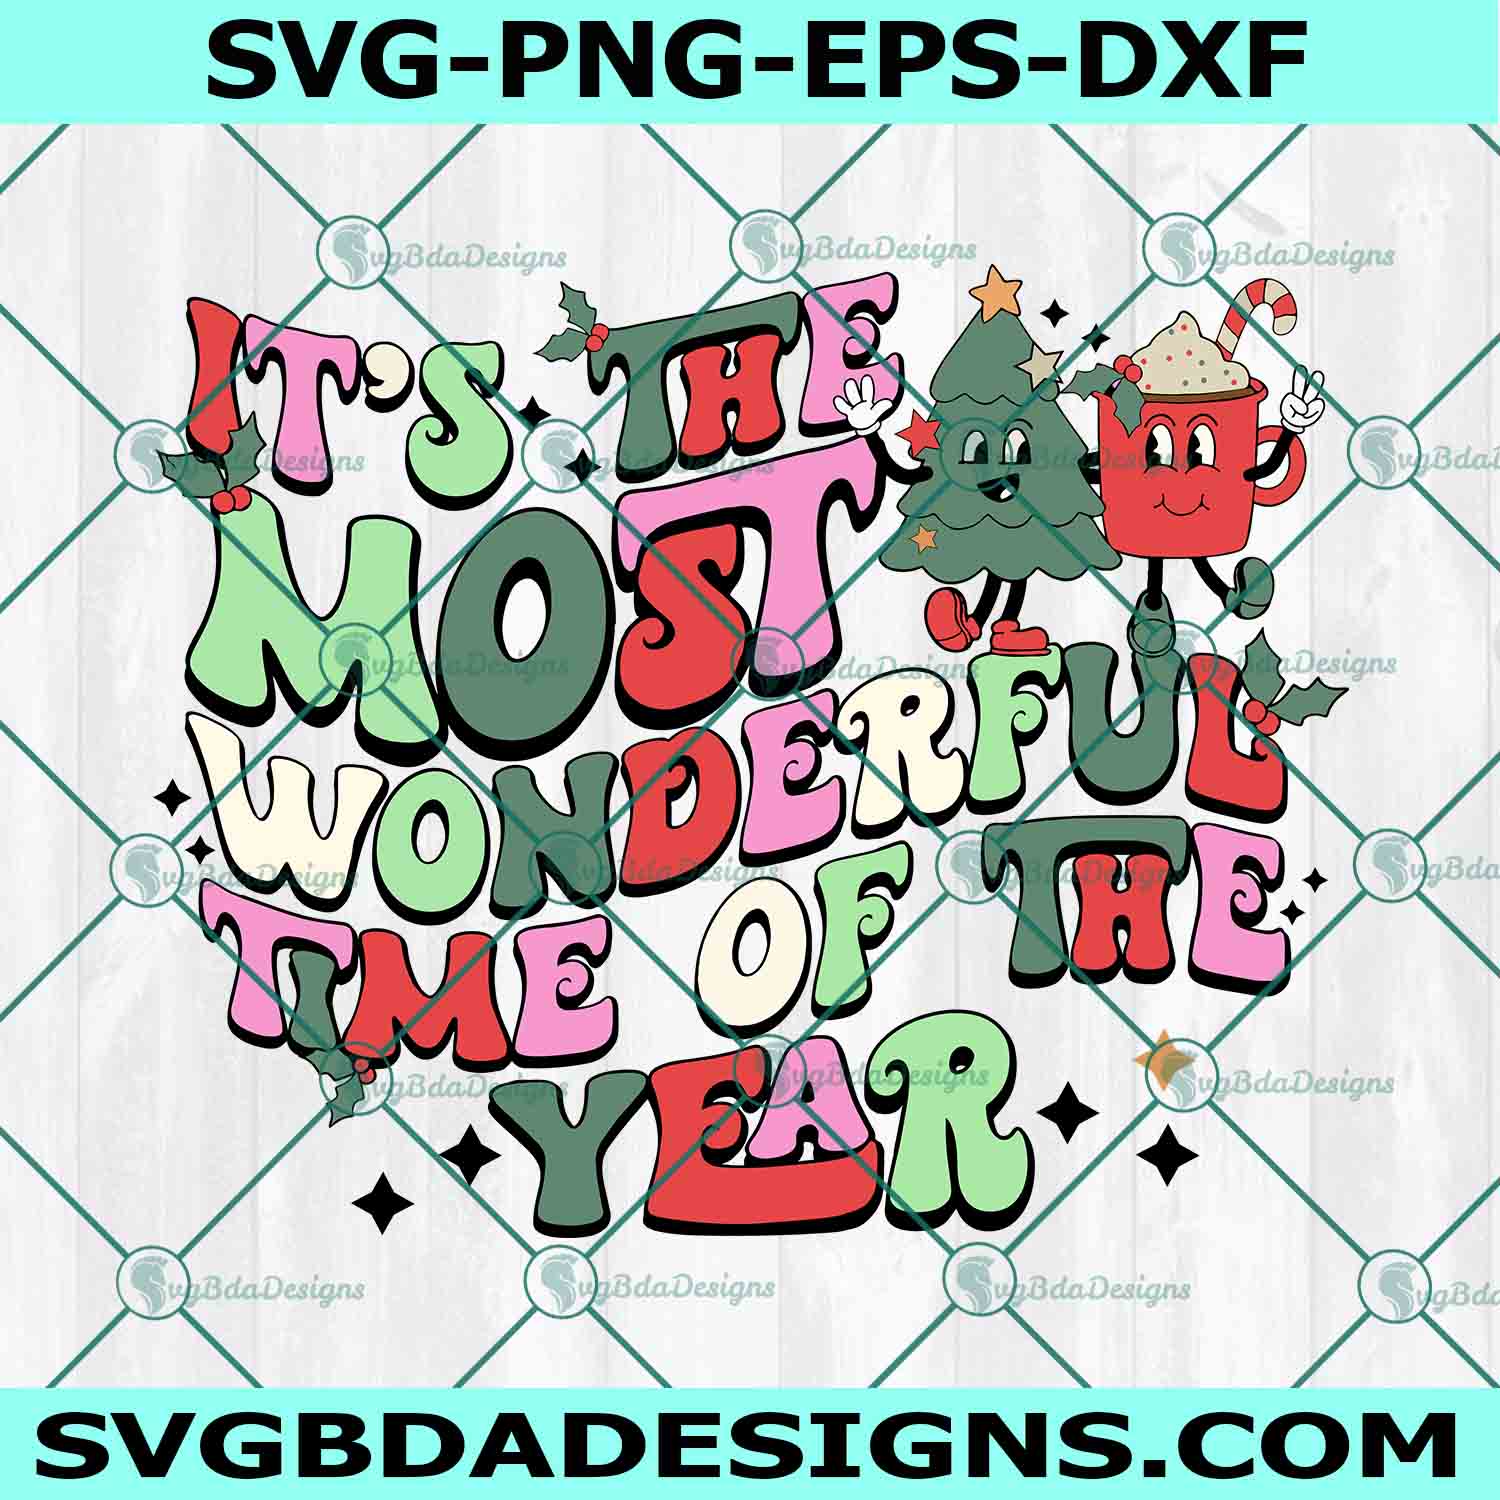 It's The Most Wonderful Time of the Year Svg, Christmas Svg, Retro Christmas Svg, Groovy Christmas Svg, Vintage ChristmasSvg,  File For Cricut